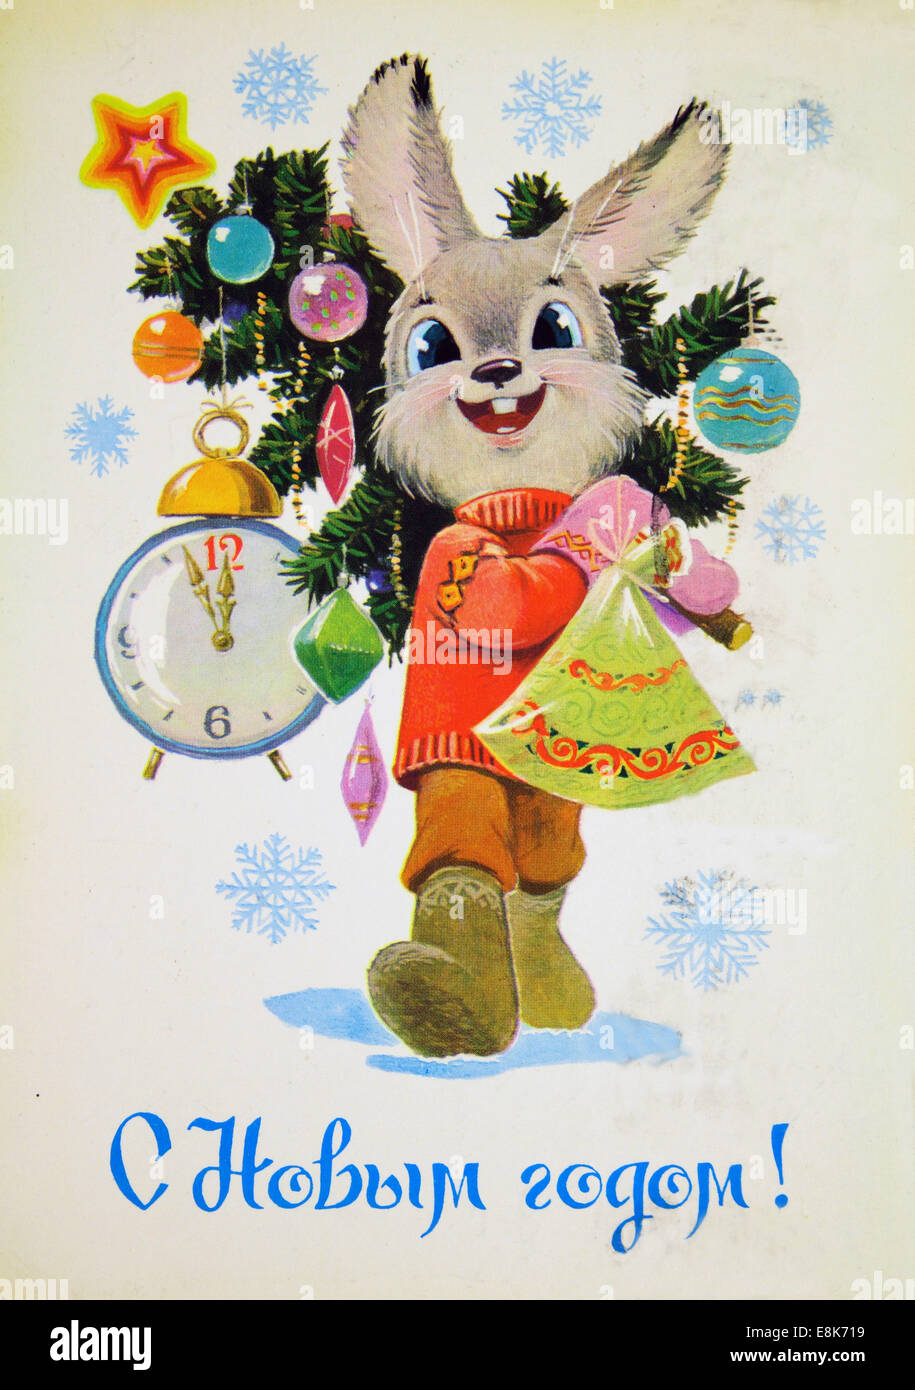 Dec. 2, 2009 - Reproduction of antique postcard shows rabbit with Christmas spruce, gifts and clocks showing the midnight, circa 1963, USSR. (Credit Image: © Igor Golovniov/ZUMA Wire/ZUMAPRESS.com) Stock Photo